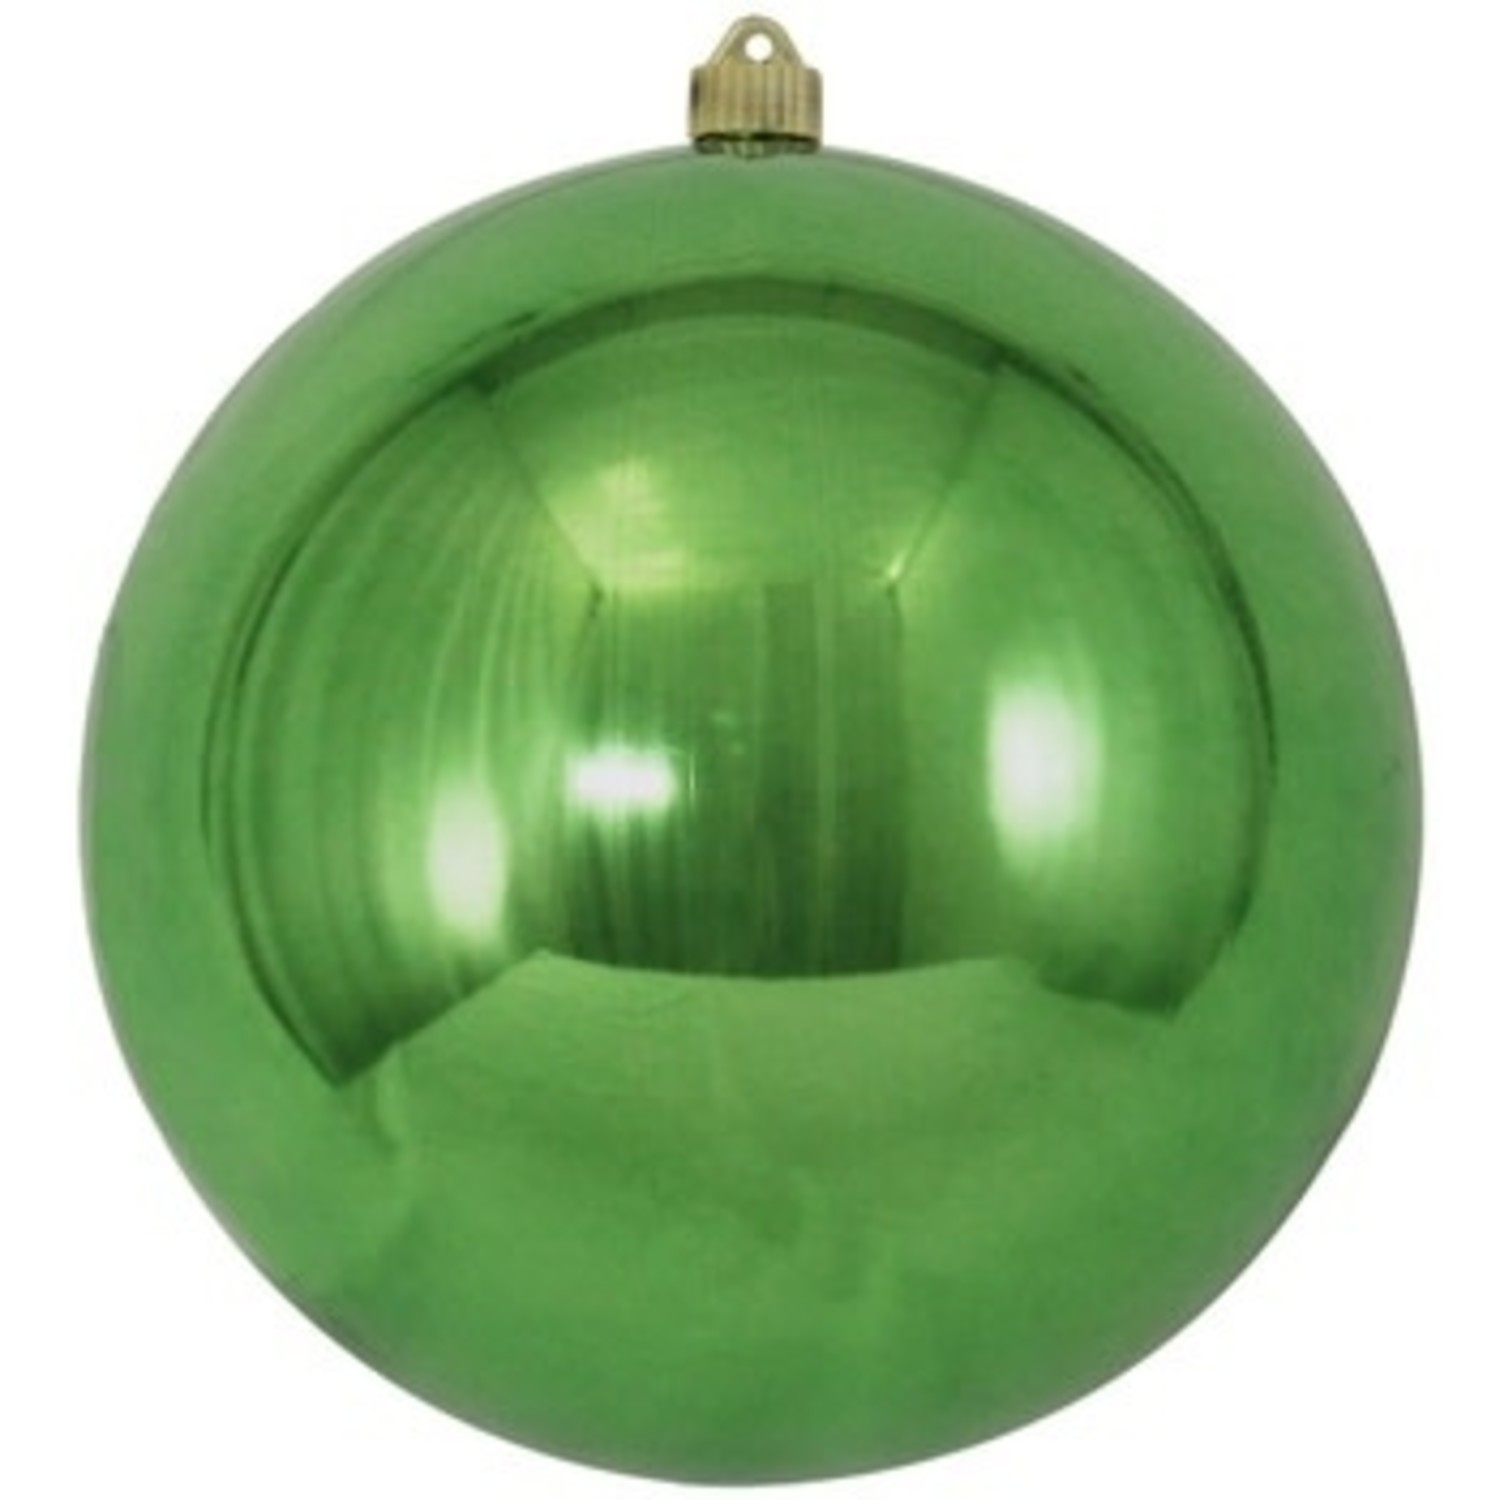 10 Giant Commercial Ball Ornament Case - Amber Marie and Company